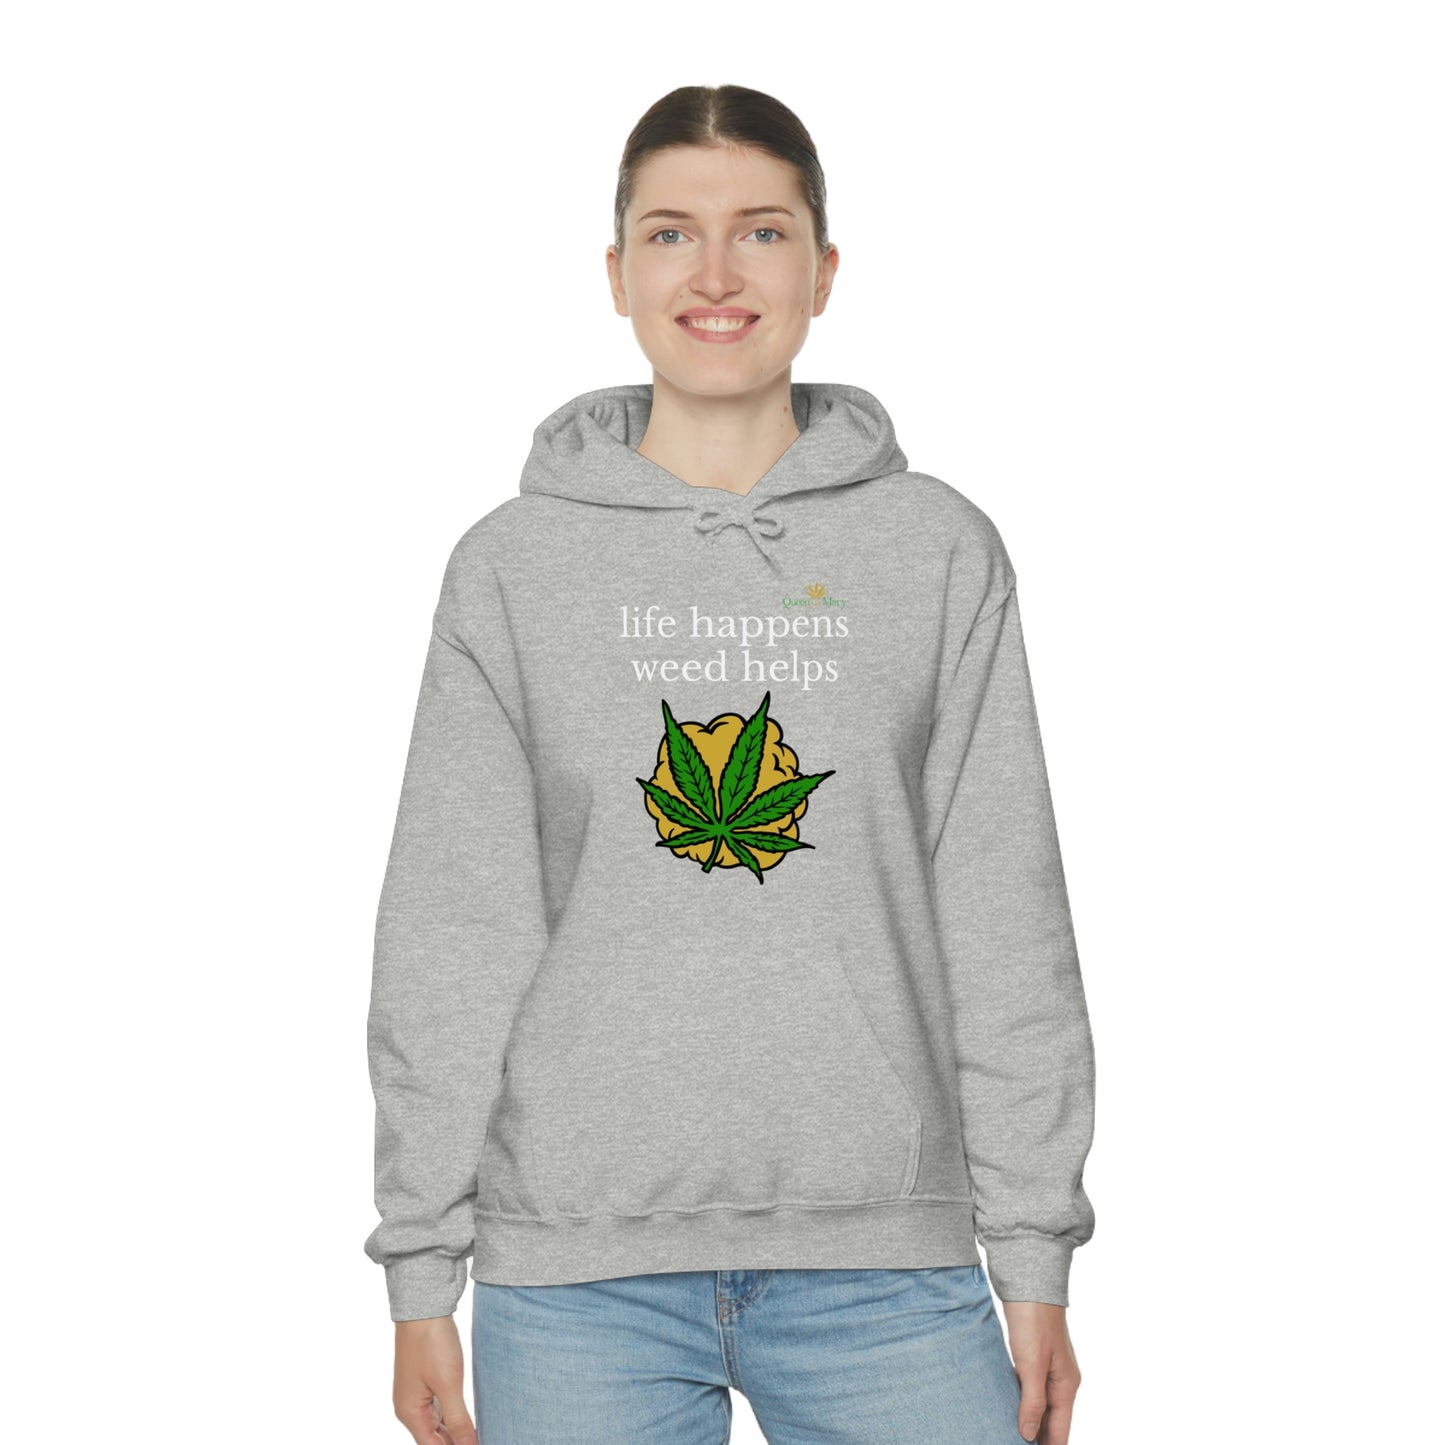 Hooded Sweatshirt by Queen Mary